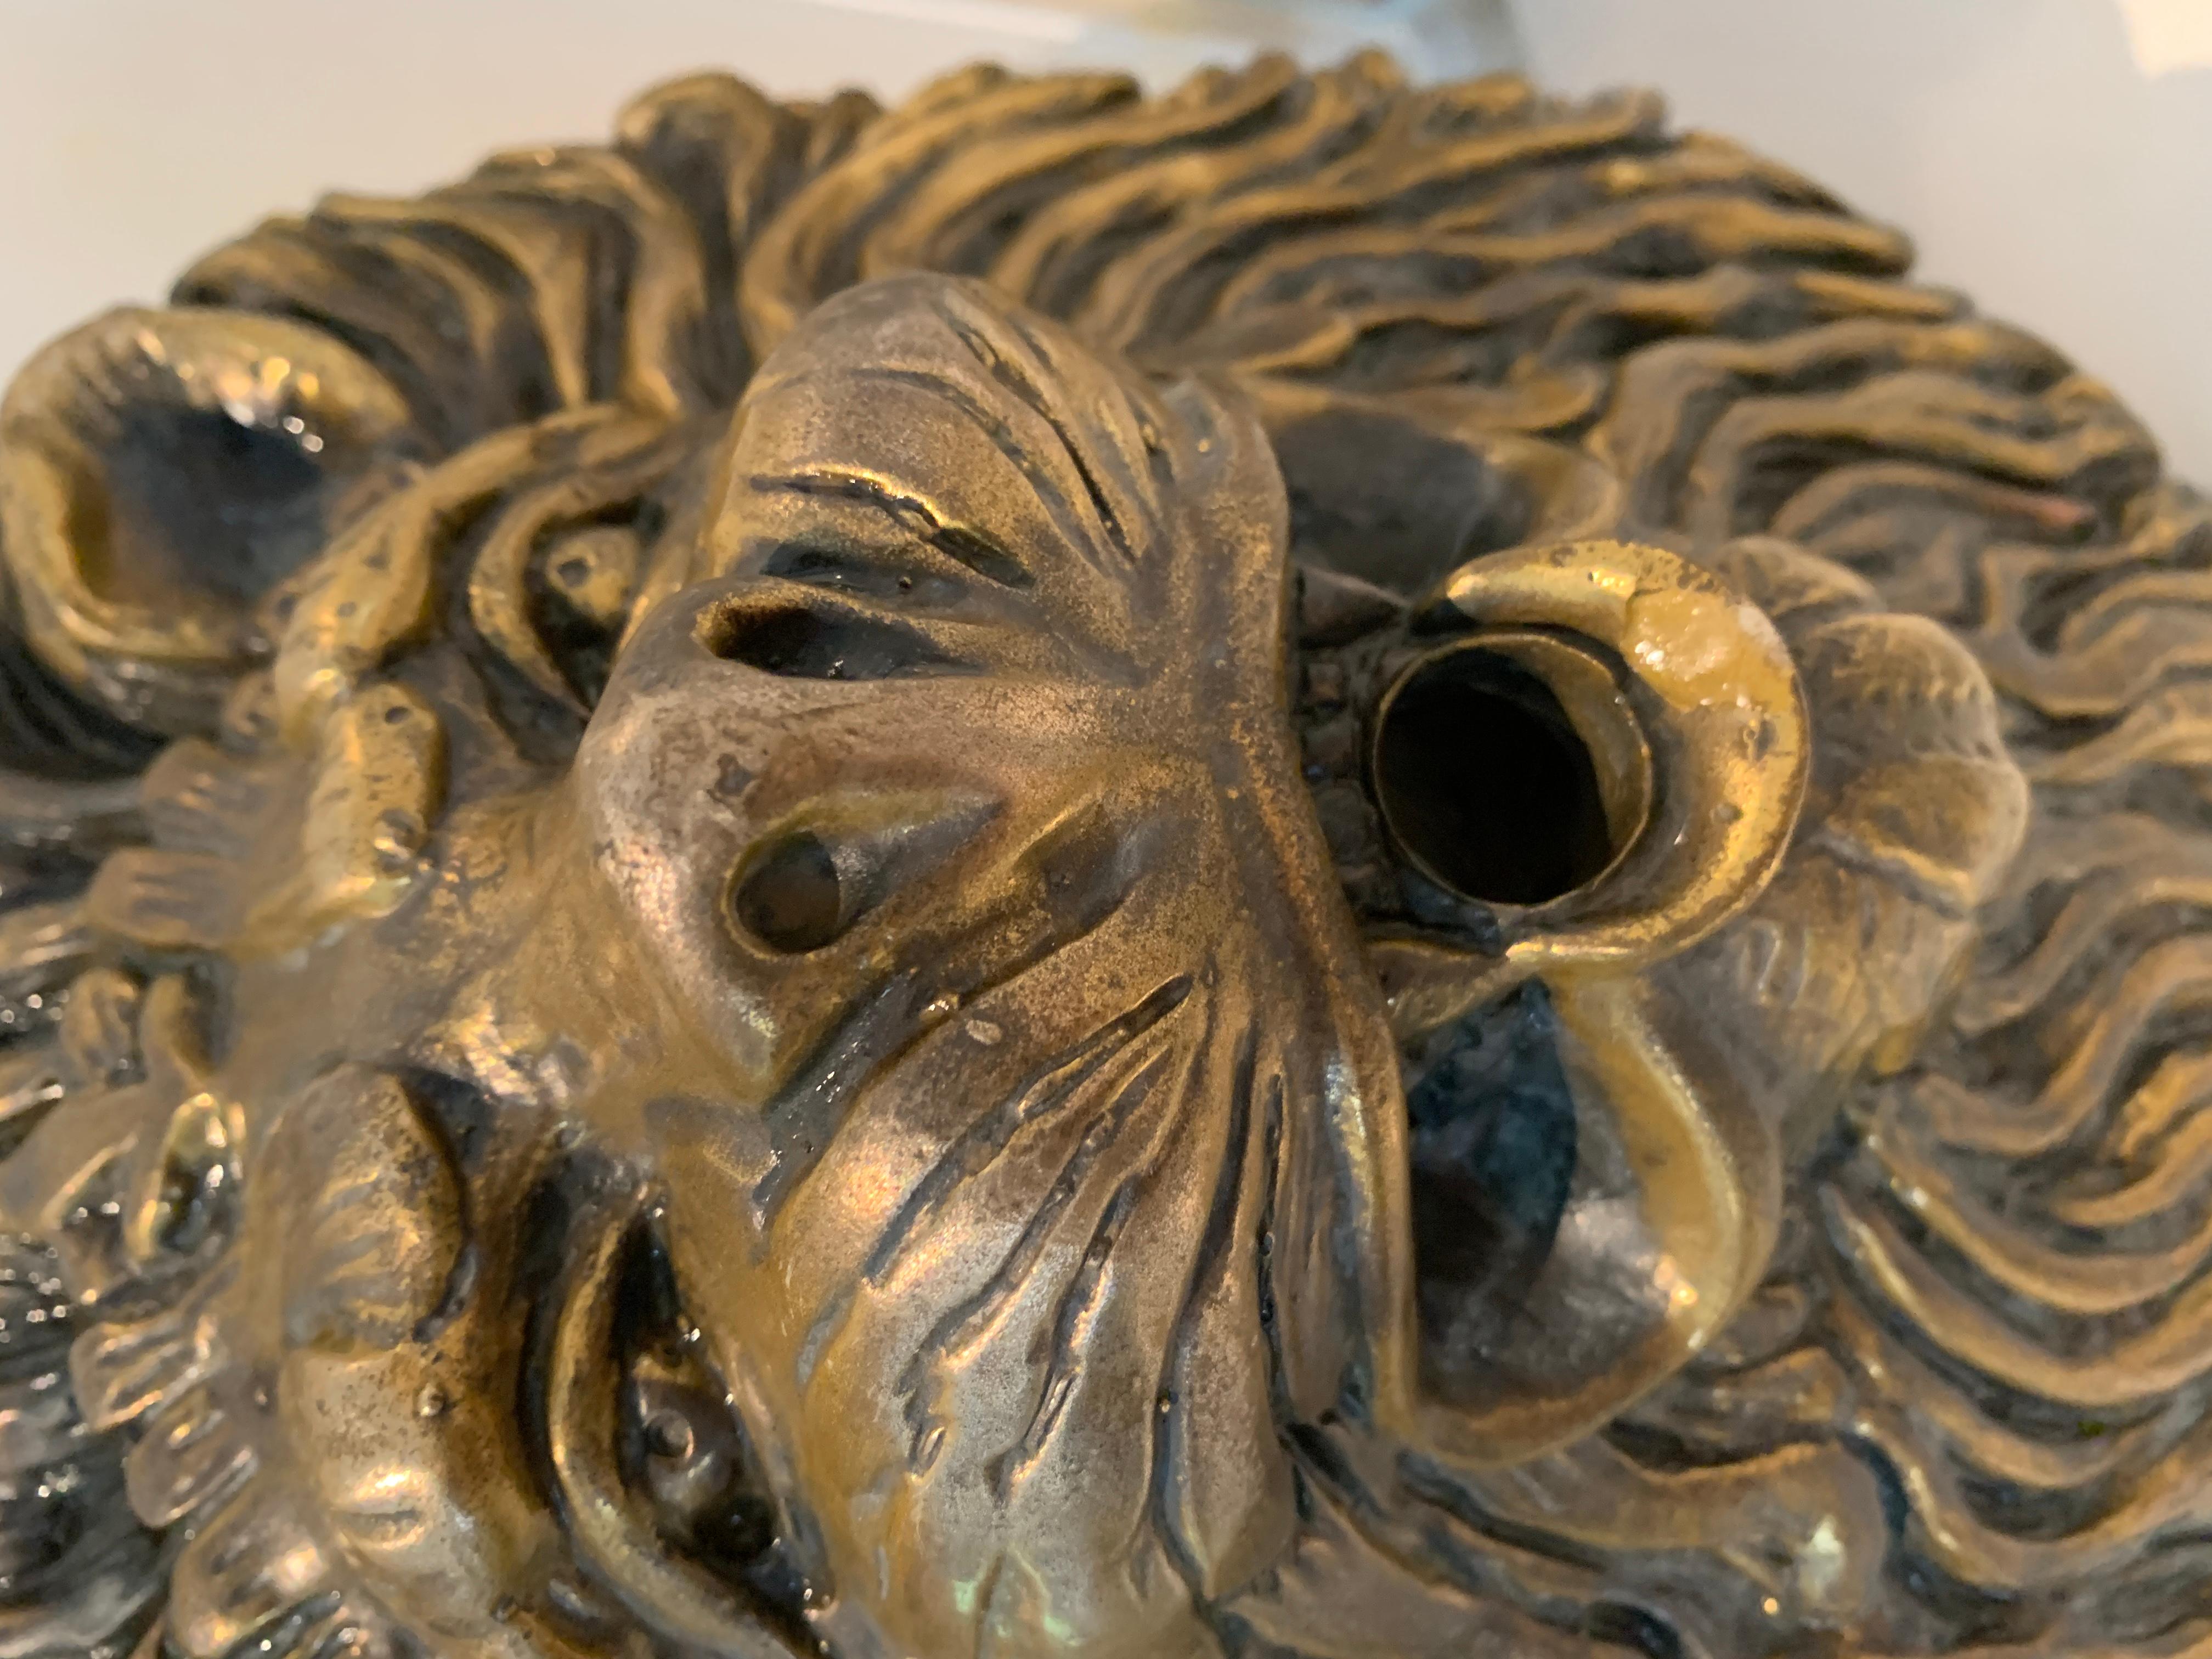 Carved brass lion fountain head - a wonderfully detailed lion head, molded clay or terra cotta on the reverse. The lions mouth has a 3/4